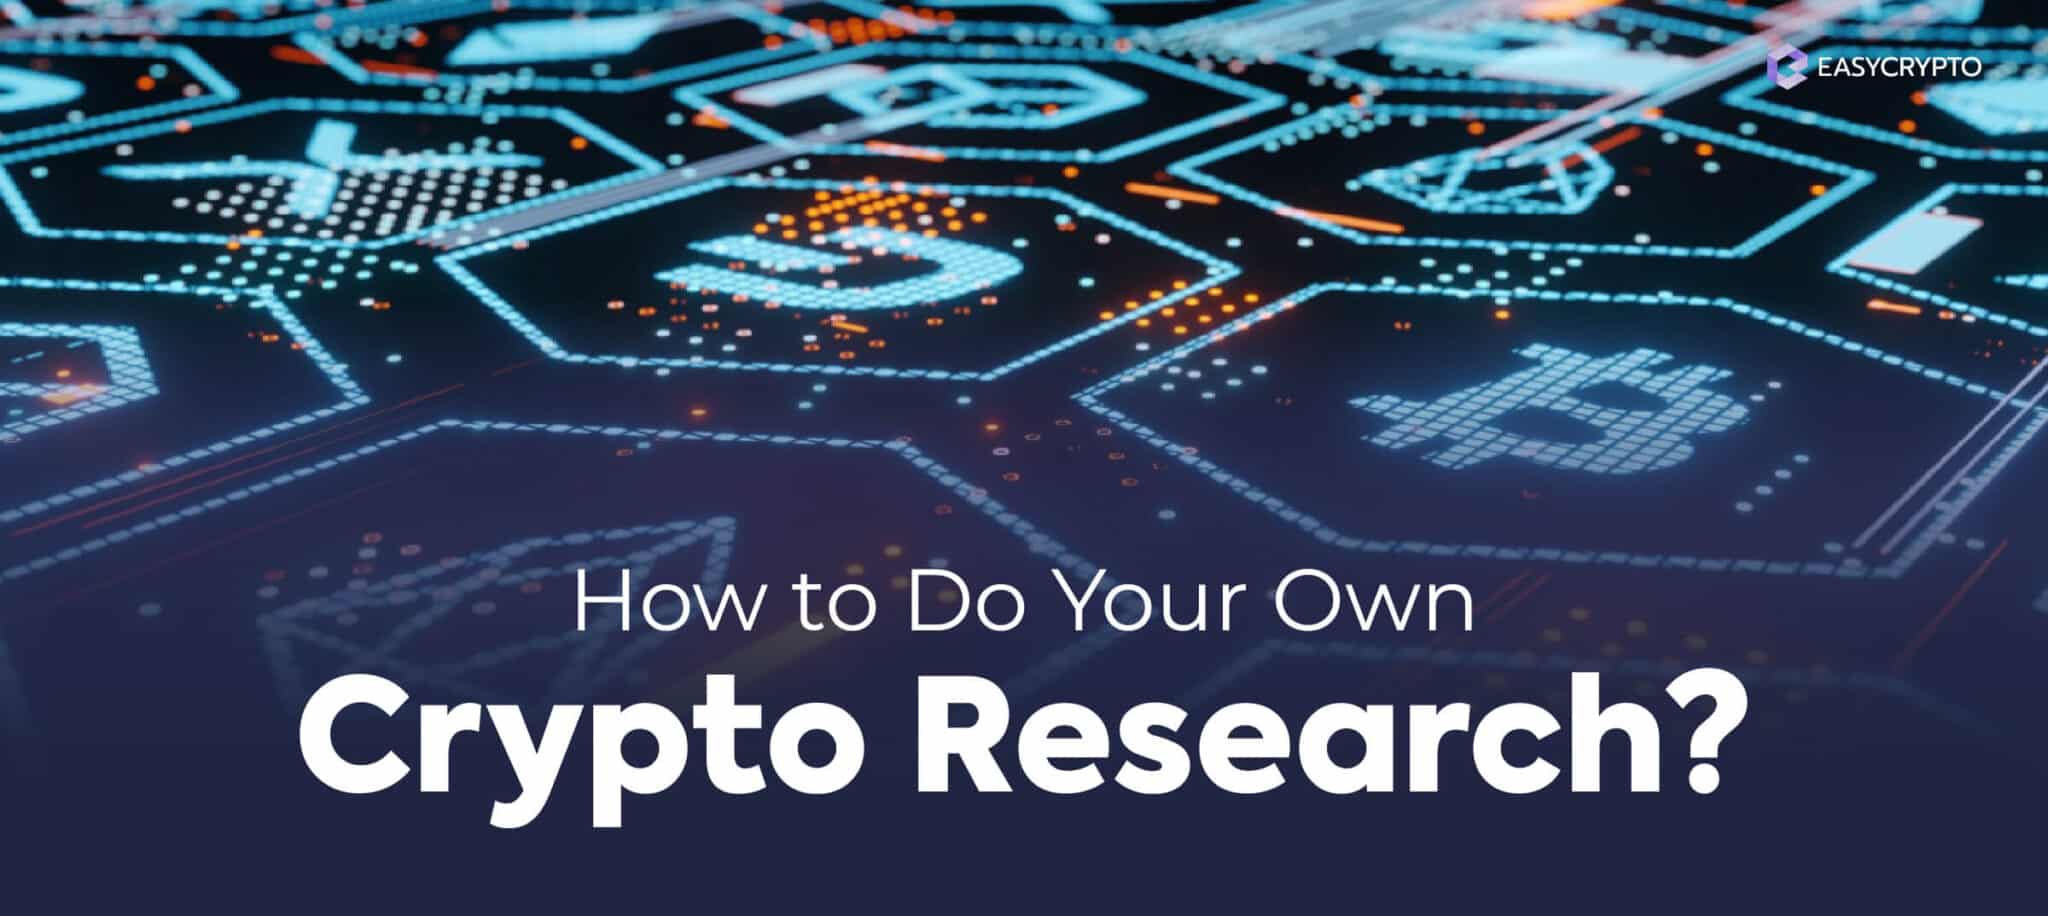 Crypto currency research comprar bitcoin online